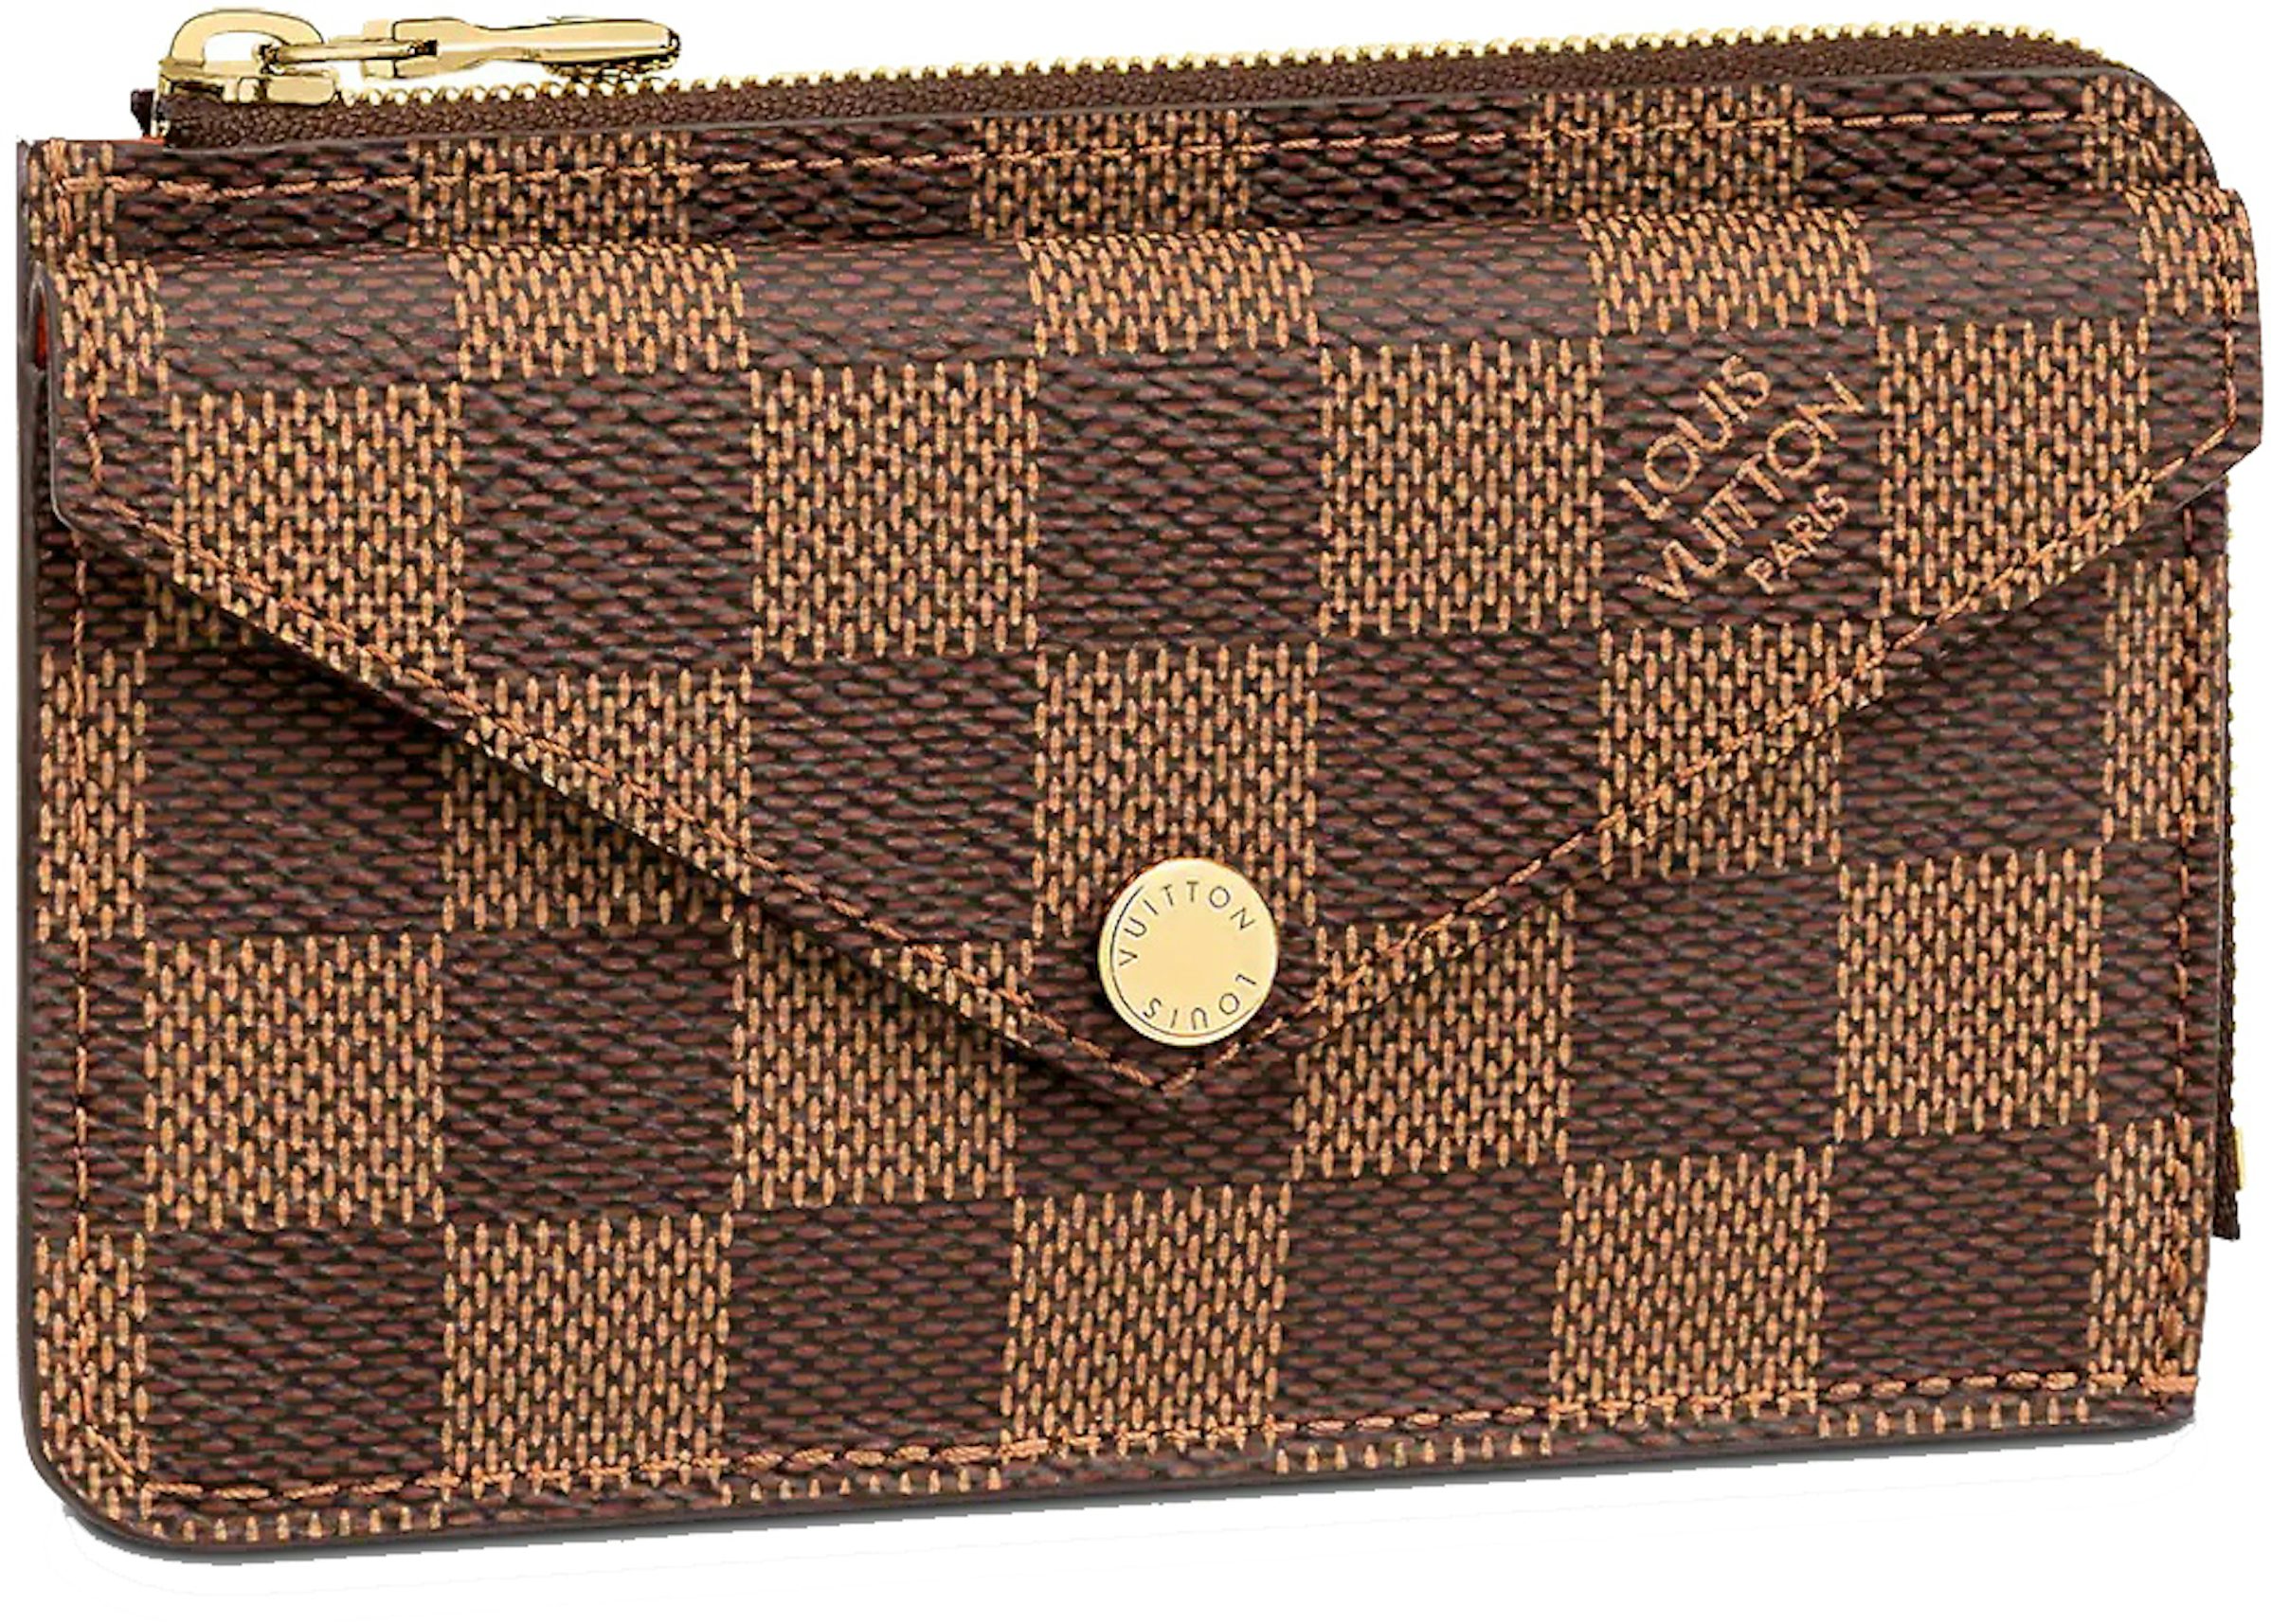 Louis Vuitton Box Bag Damier Ebene Stories Brown/Red in Coated